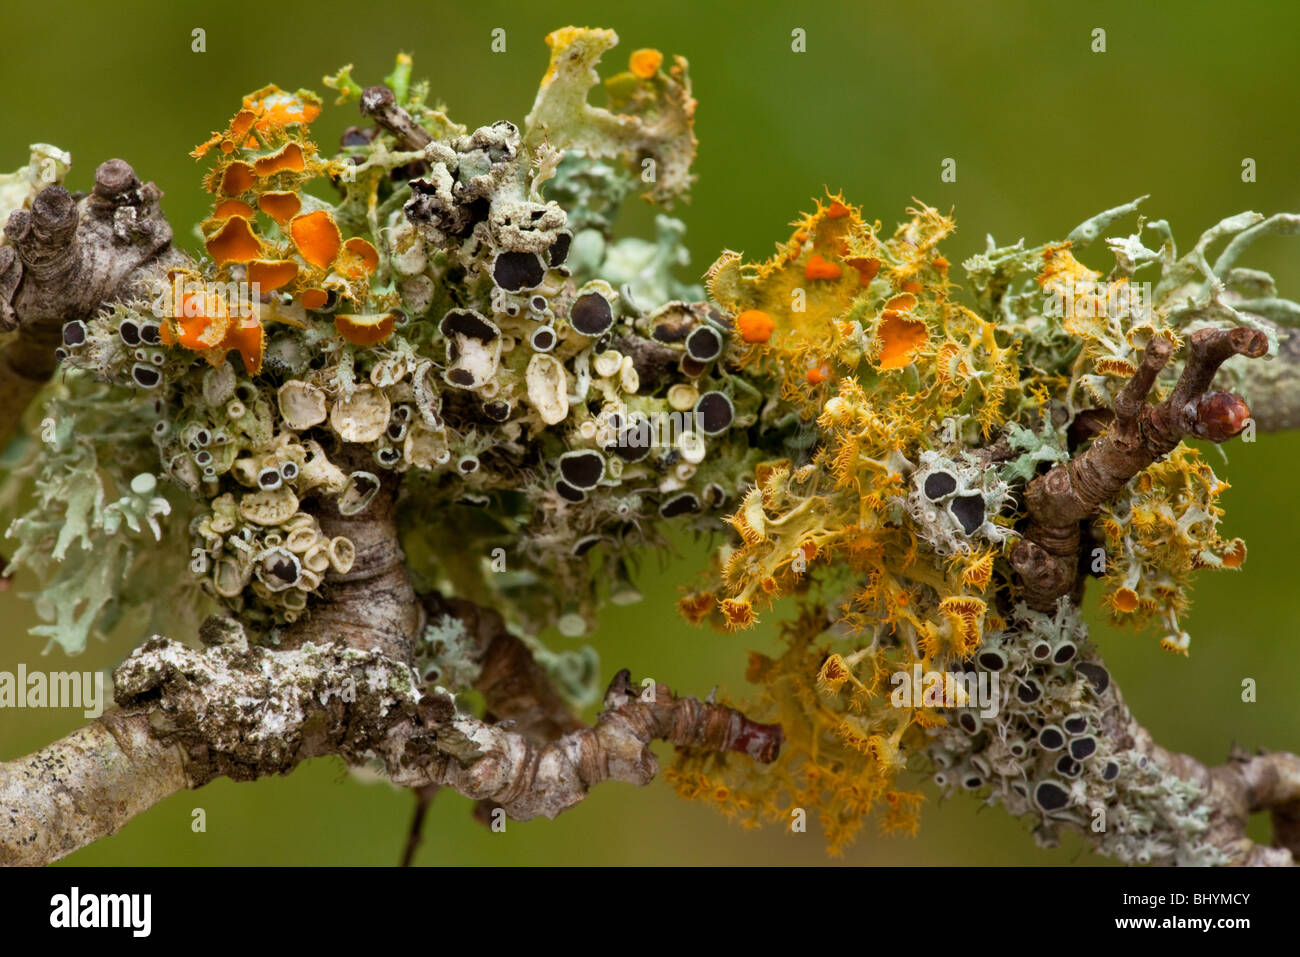 Lichens on blackthorn growing profusely in unpolluted humid conditions, Brittany. Species include Goldeneye Teloschistes Stock Photo